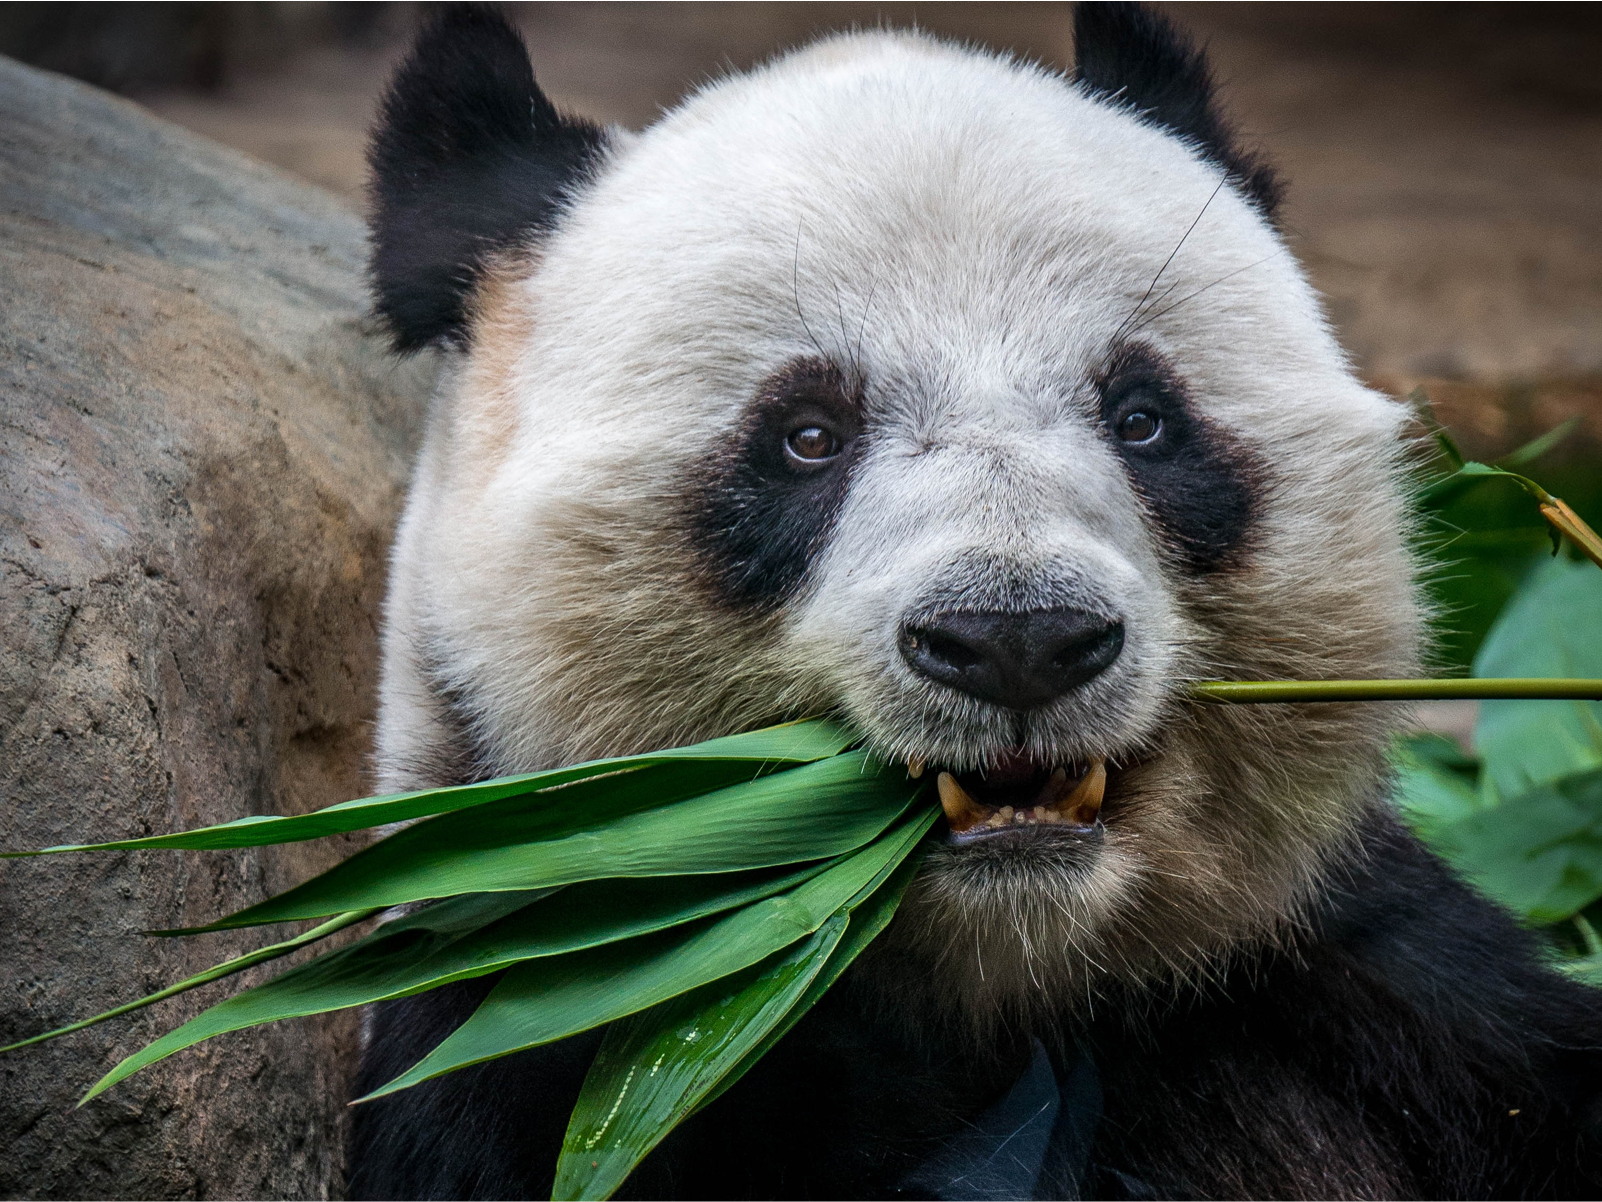 A close-up photo of a panda eating leaves.